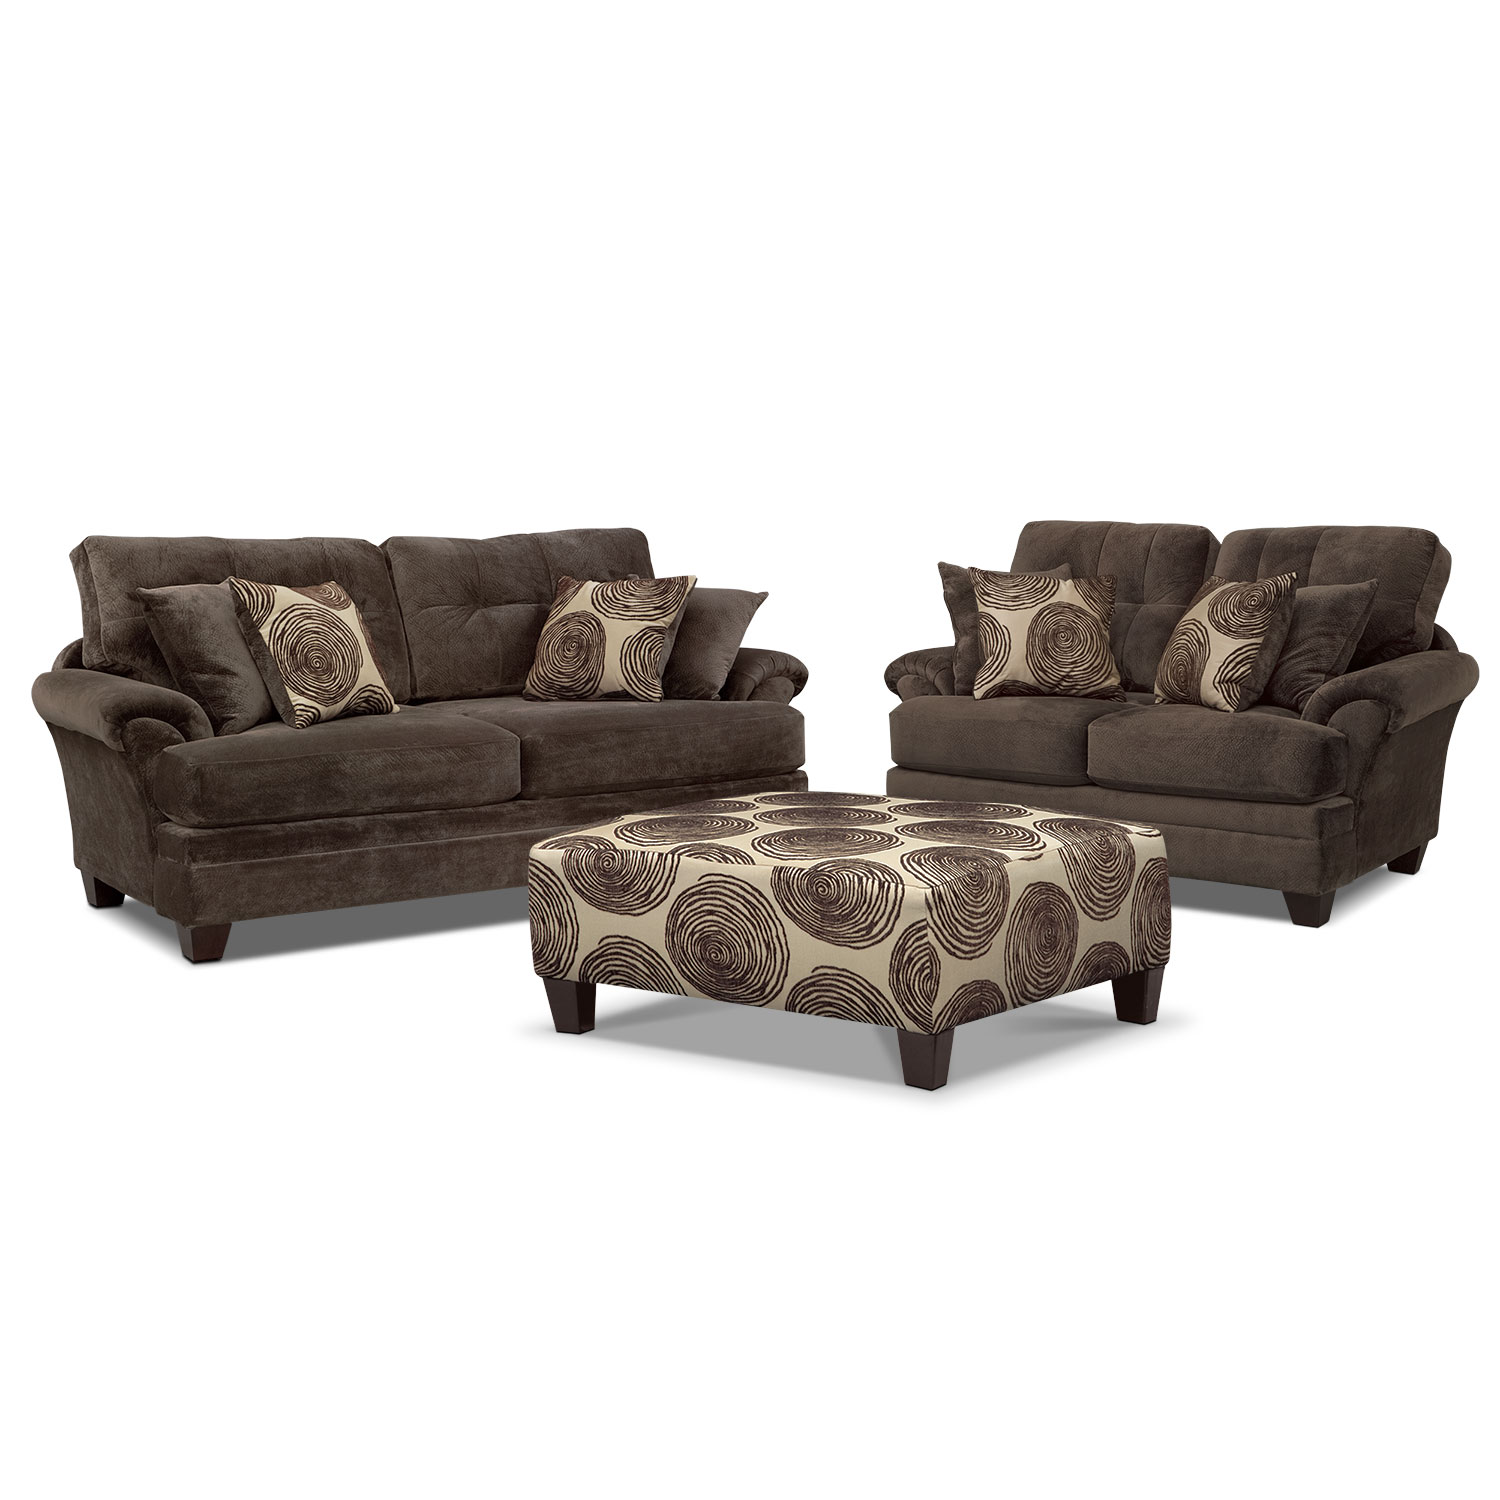 Cordelle Sofa, Loveseat and Cocktail Ottoman Set | Value City